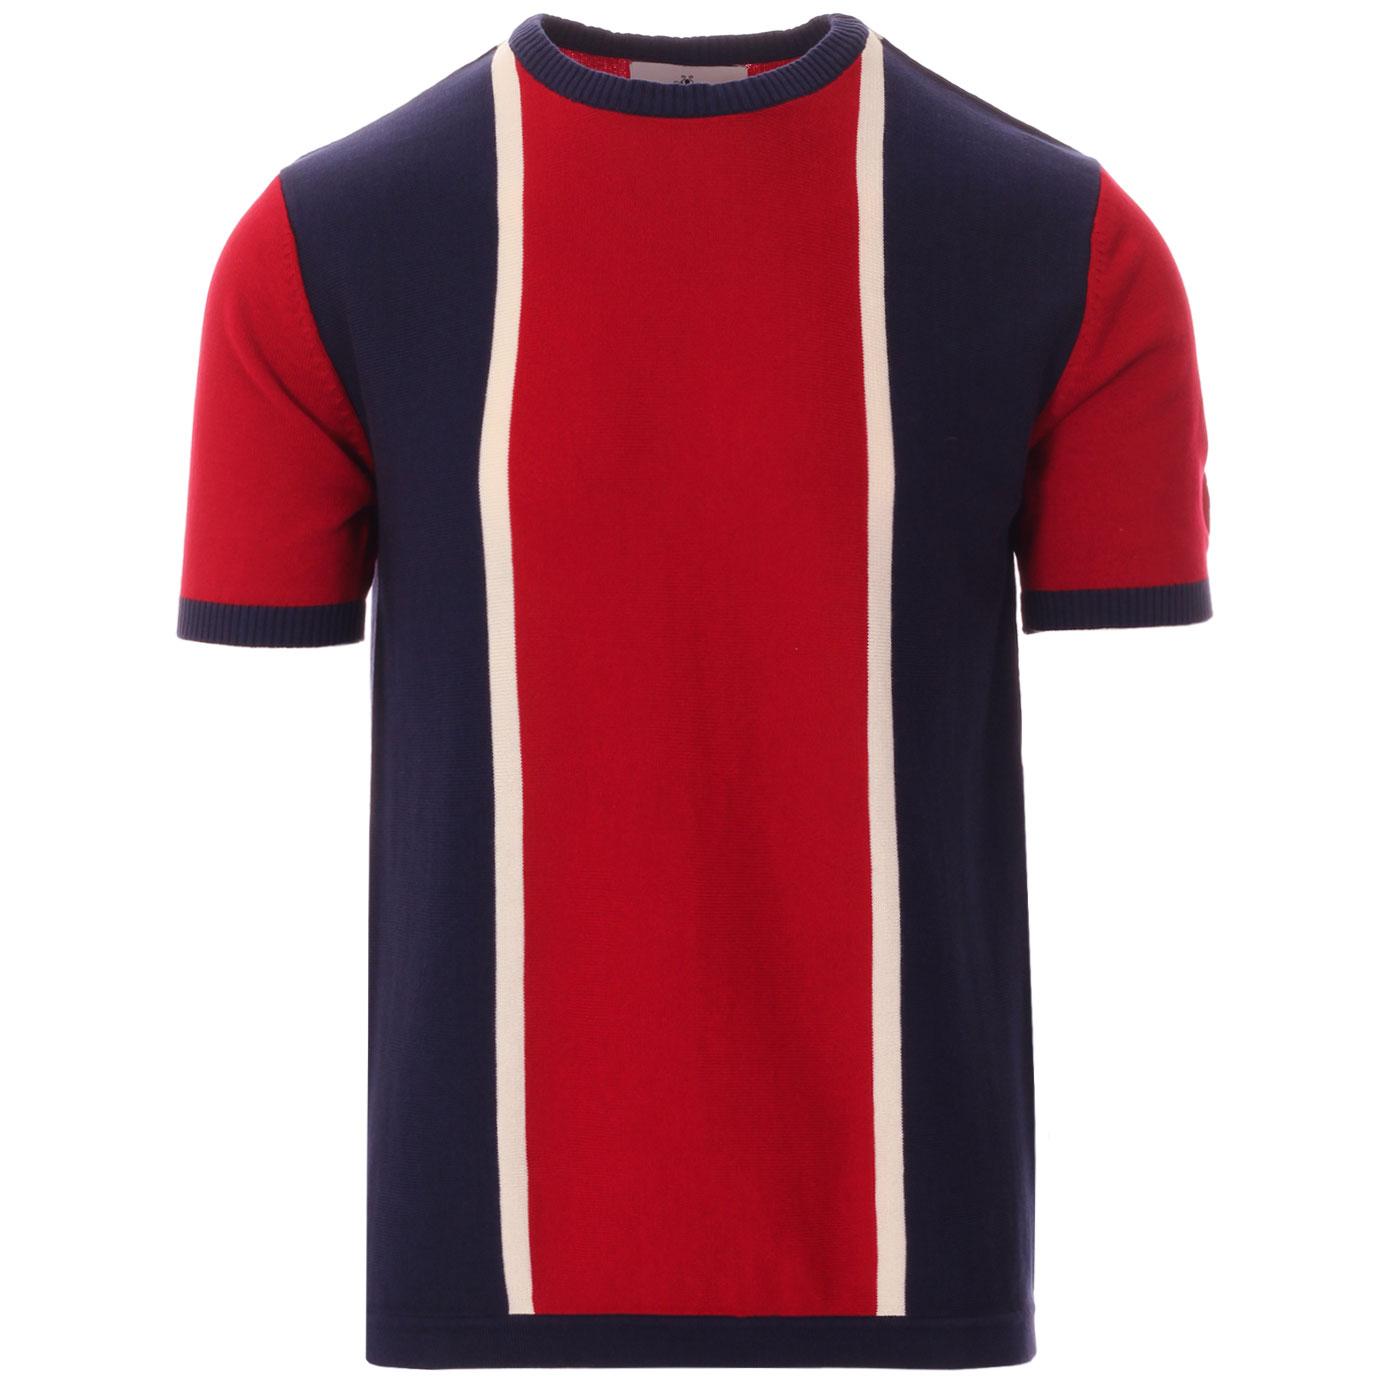 Belmont MADCAP ENGLAND 1960s Mod Knitted Tee (LR)